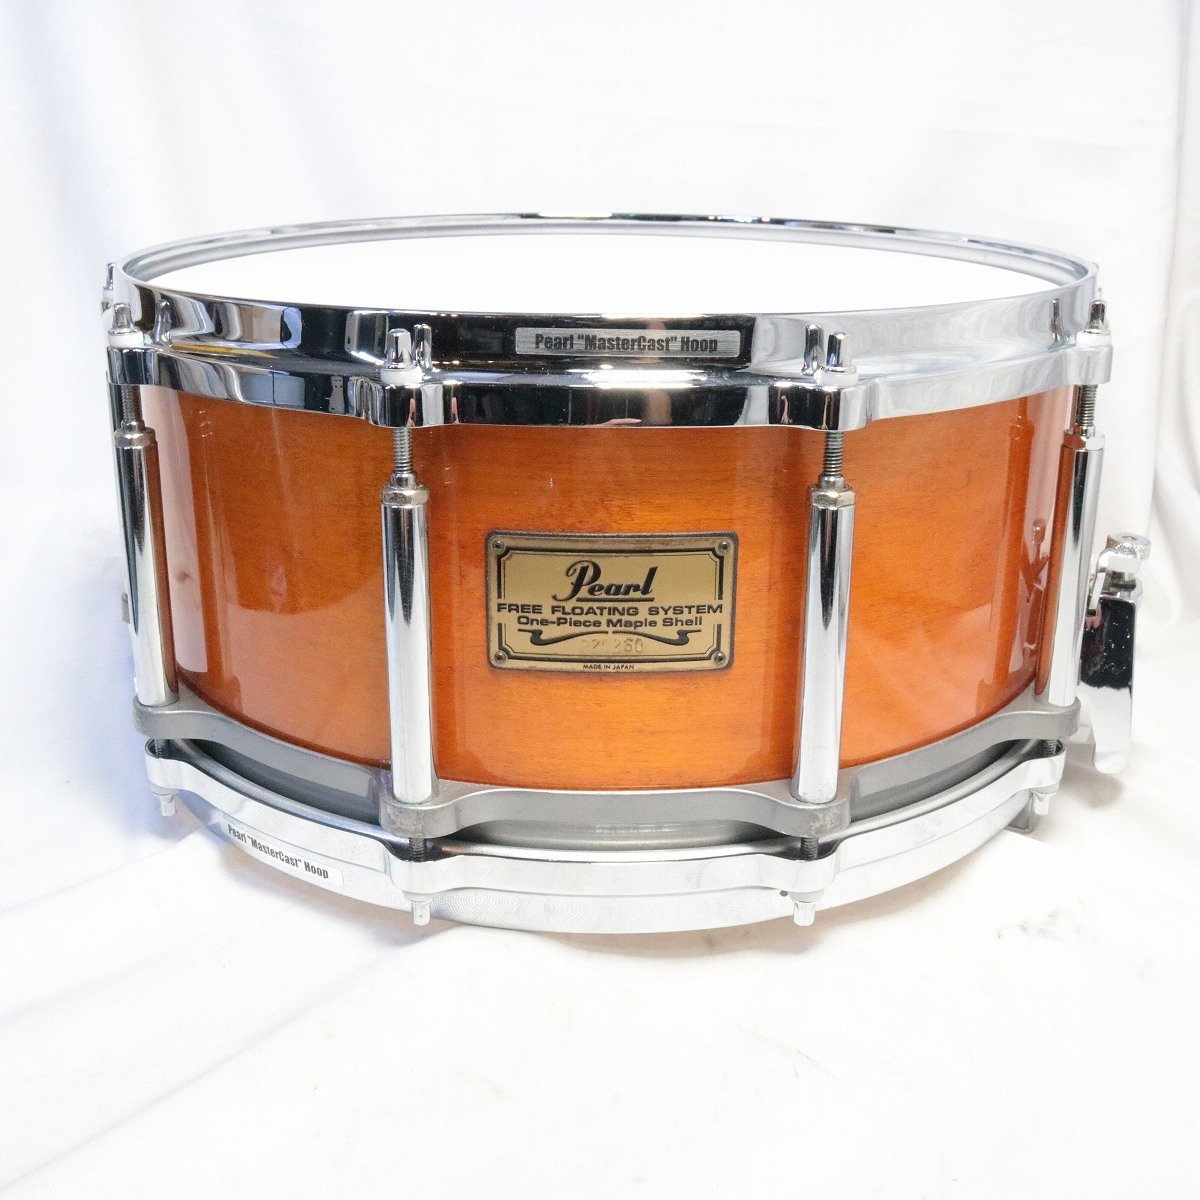 PEARL Free Floating System Birch 14x6.5